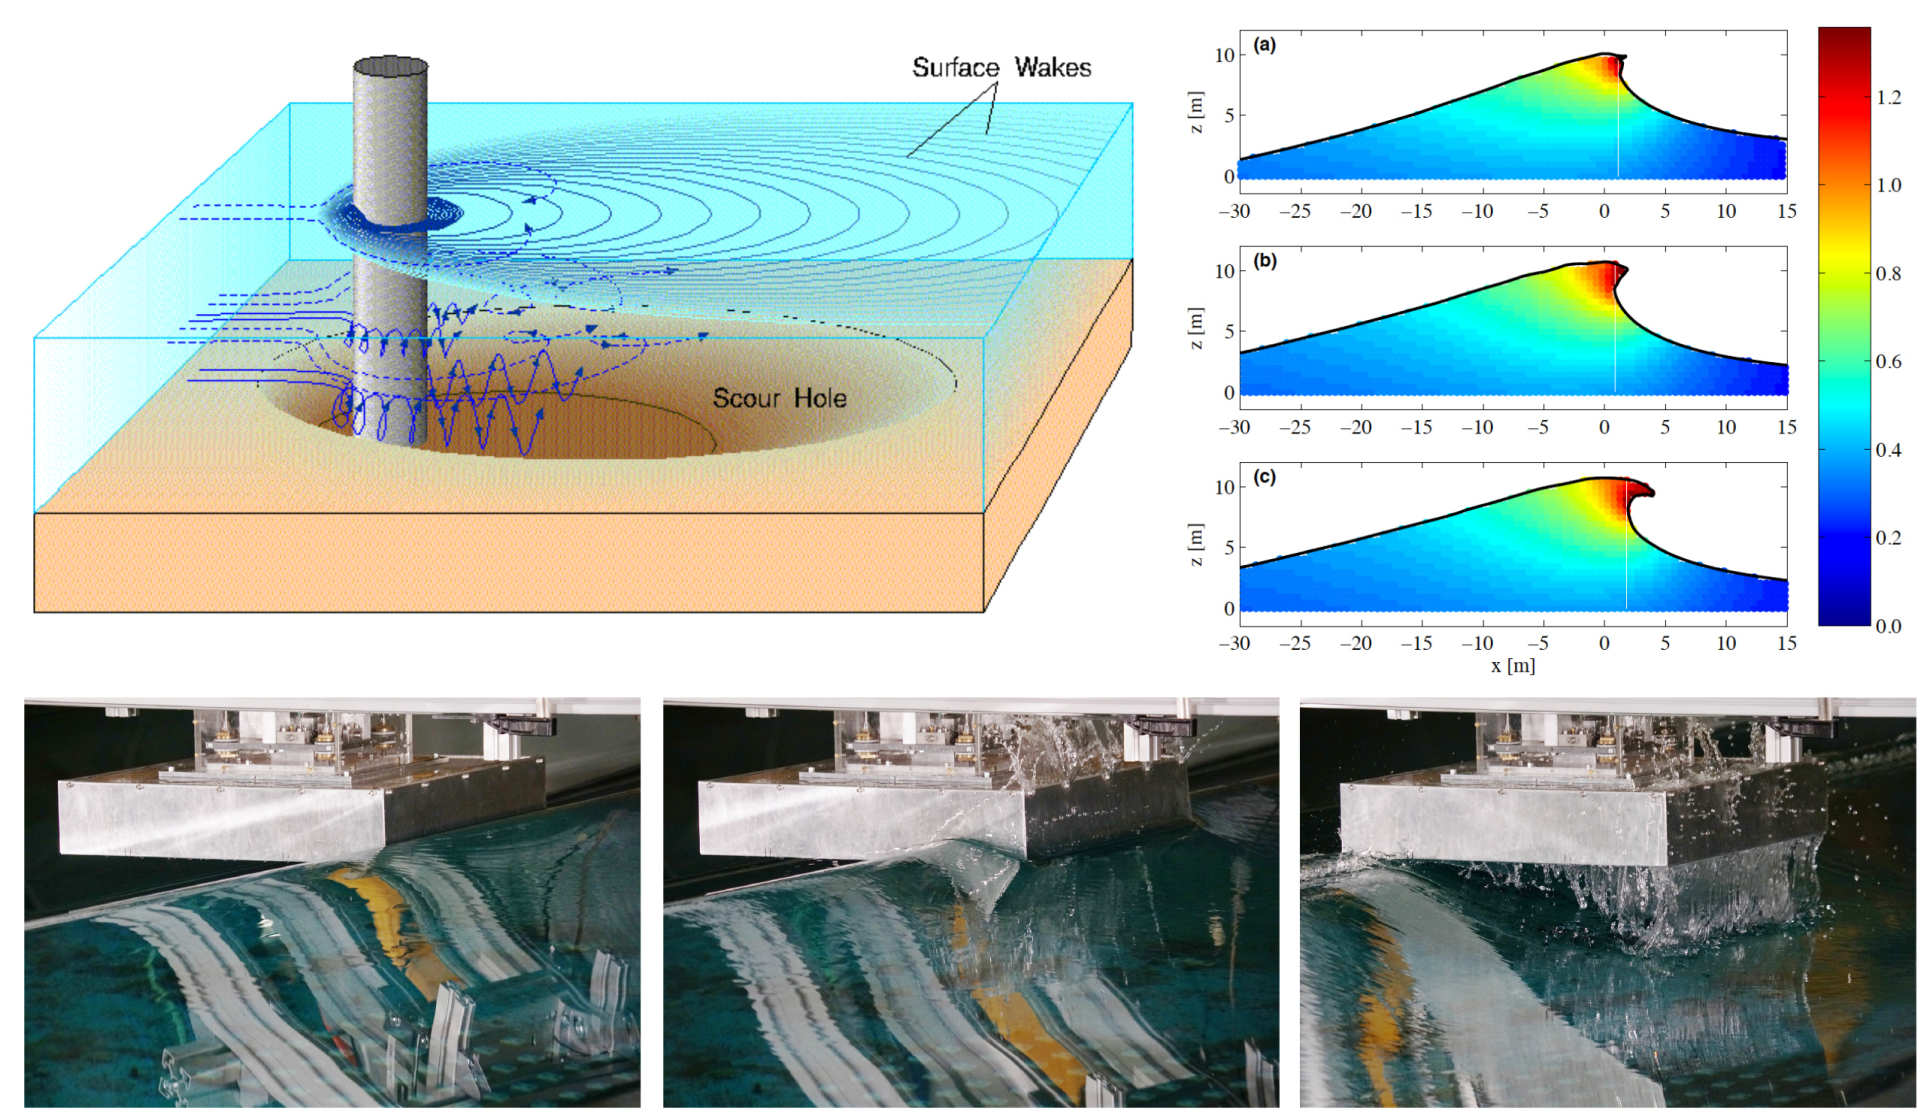 [Top-left] Flow around a column and associated scour hole, [Top-right] Modelling spilling and plunging breaking waves and their underlying particle kinematics, [Bottom] Sequence of photographs of a breaking wave hitting a deck structure, as modelled in the wave basing within the Hydrodynamics laboratory.